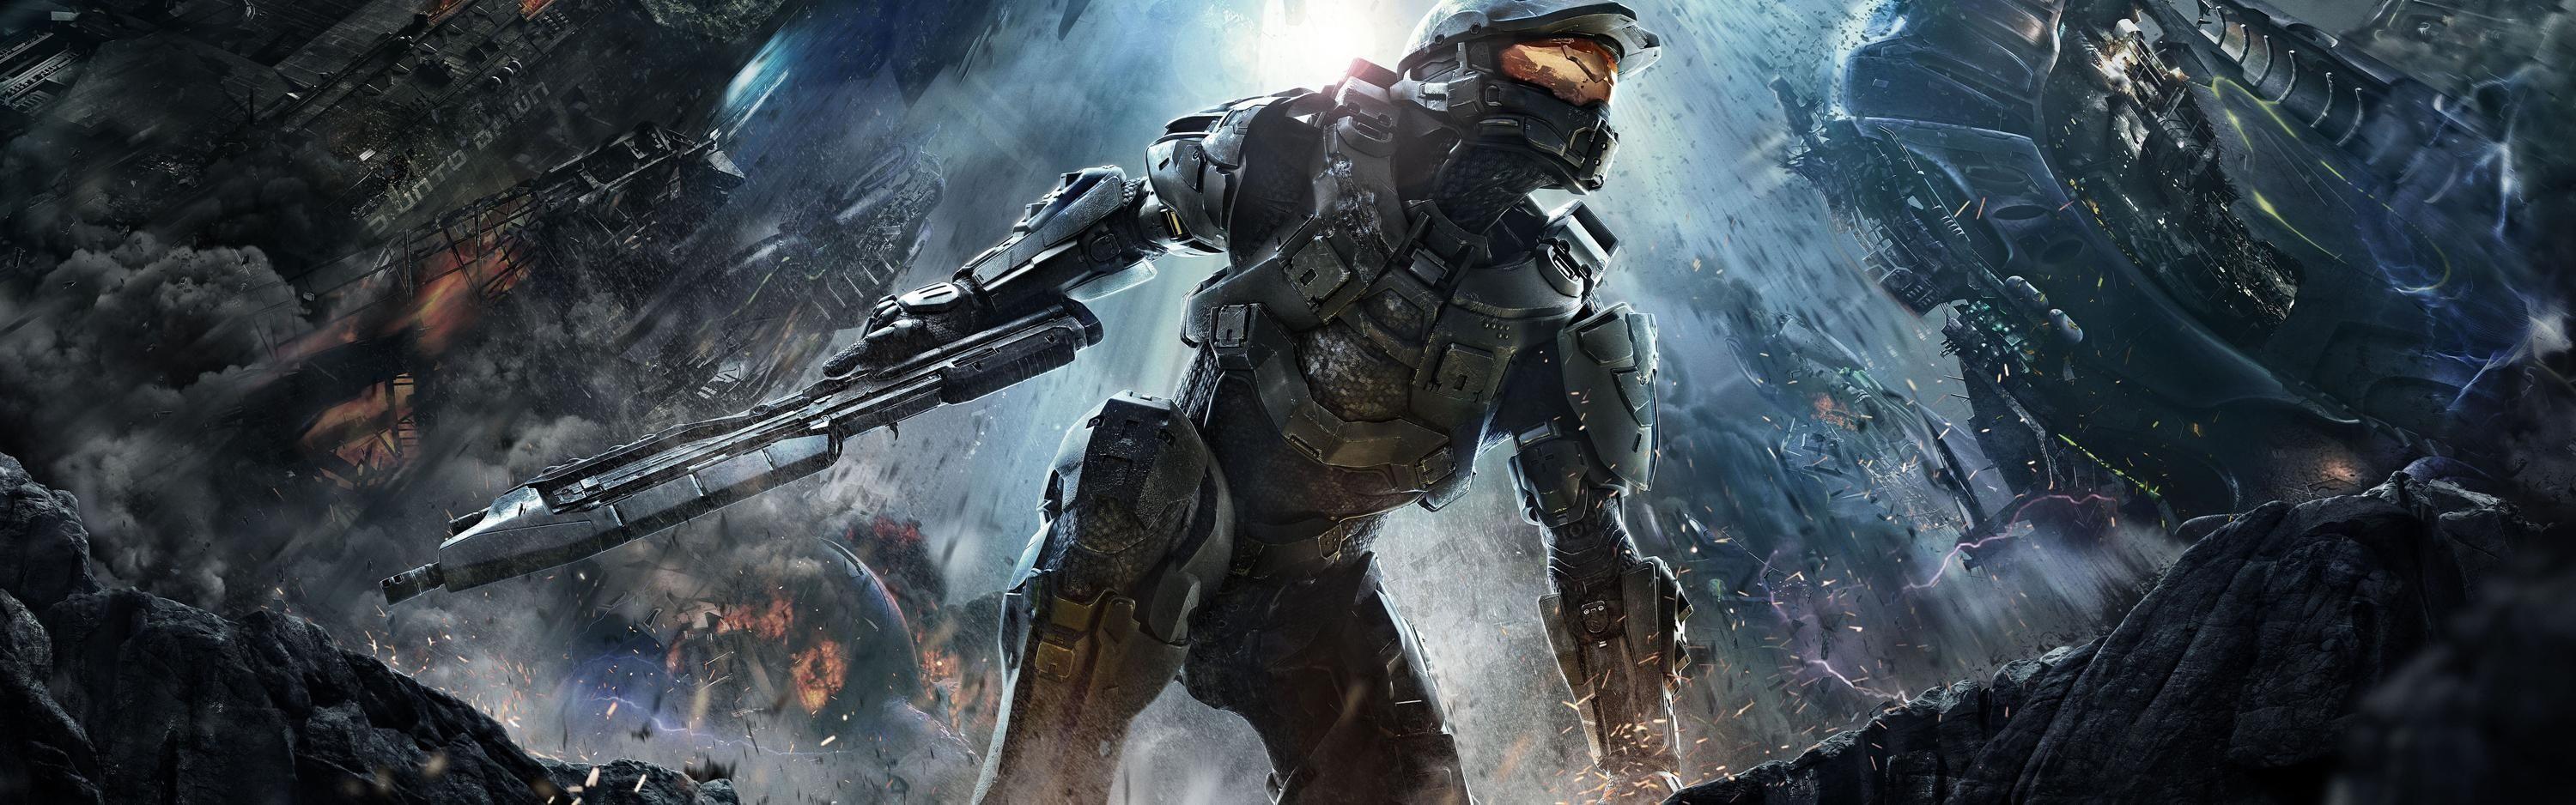 Halo Dual Screen Wallpapers - Top Free Halo Dual Screen Backgrounds